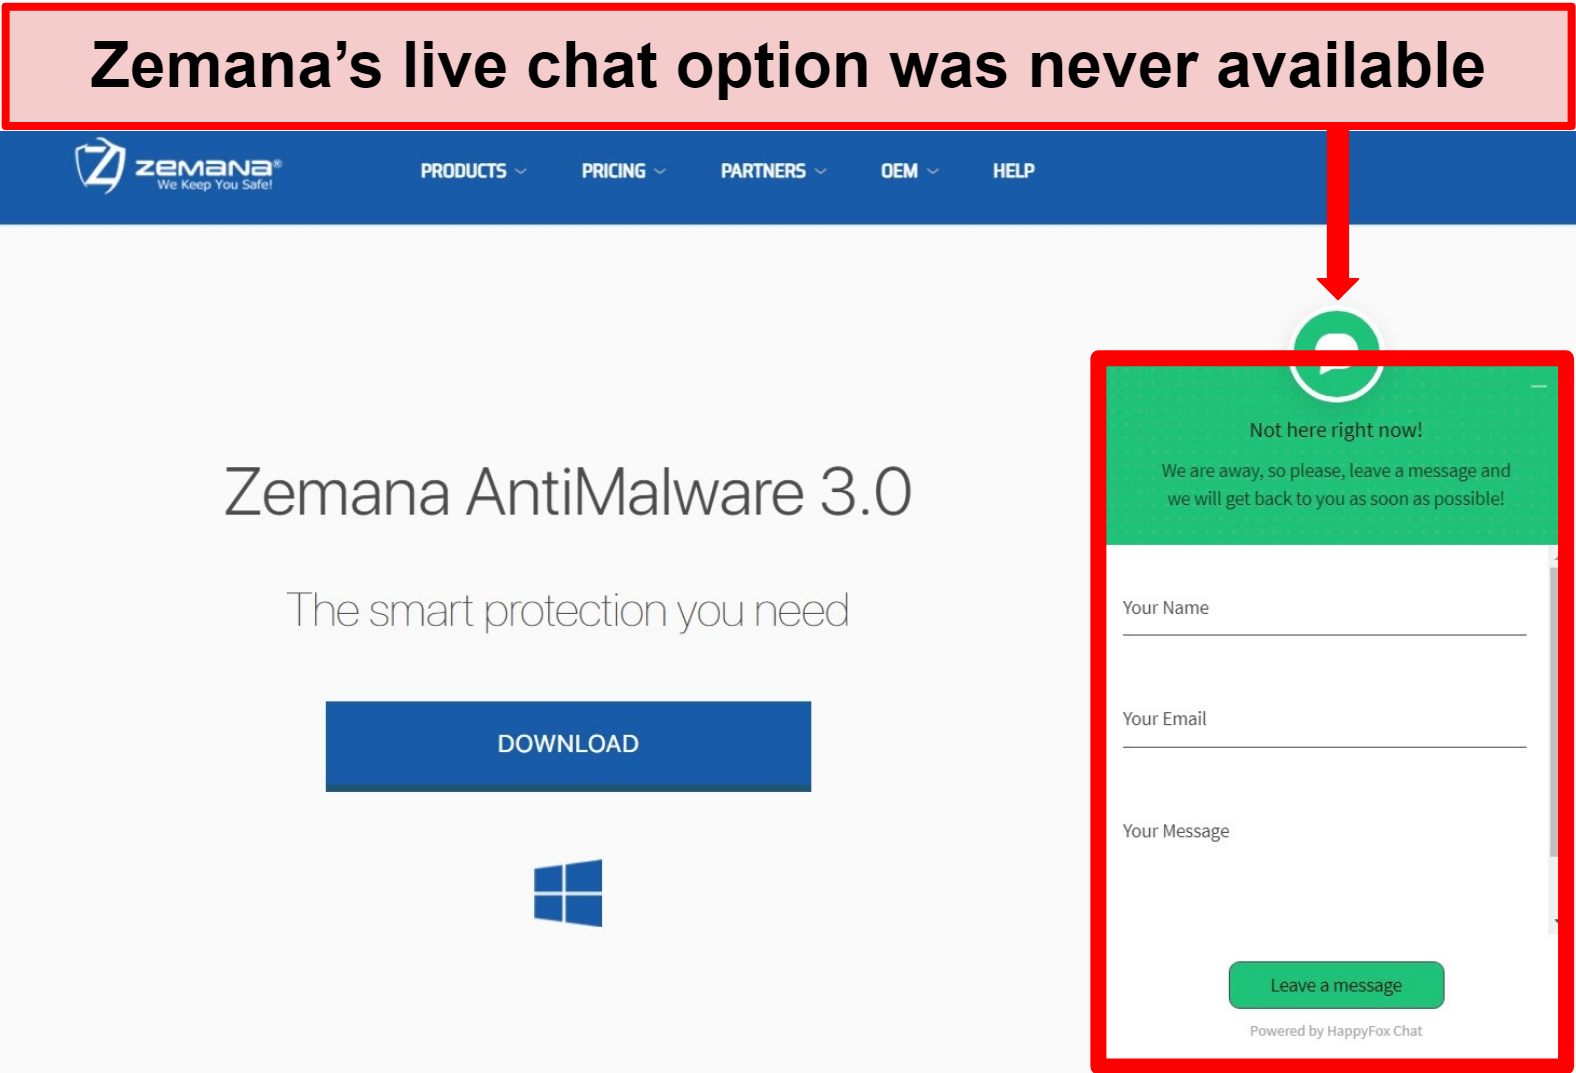 Screenshot of Zemana's live chat function unavailable at the time.